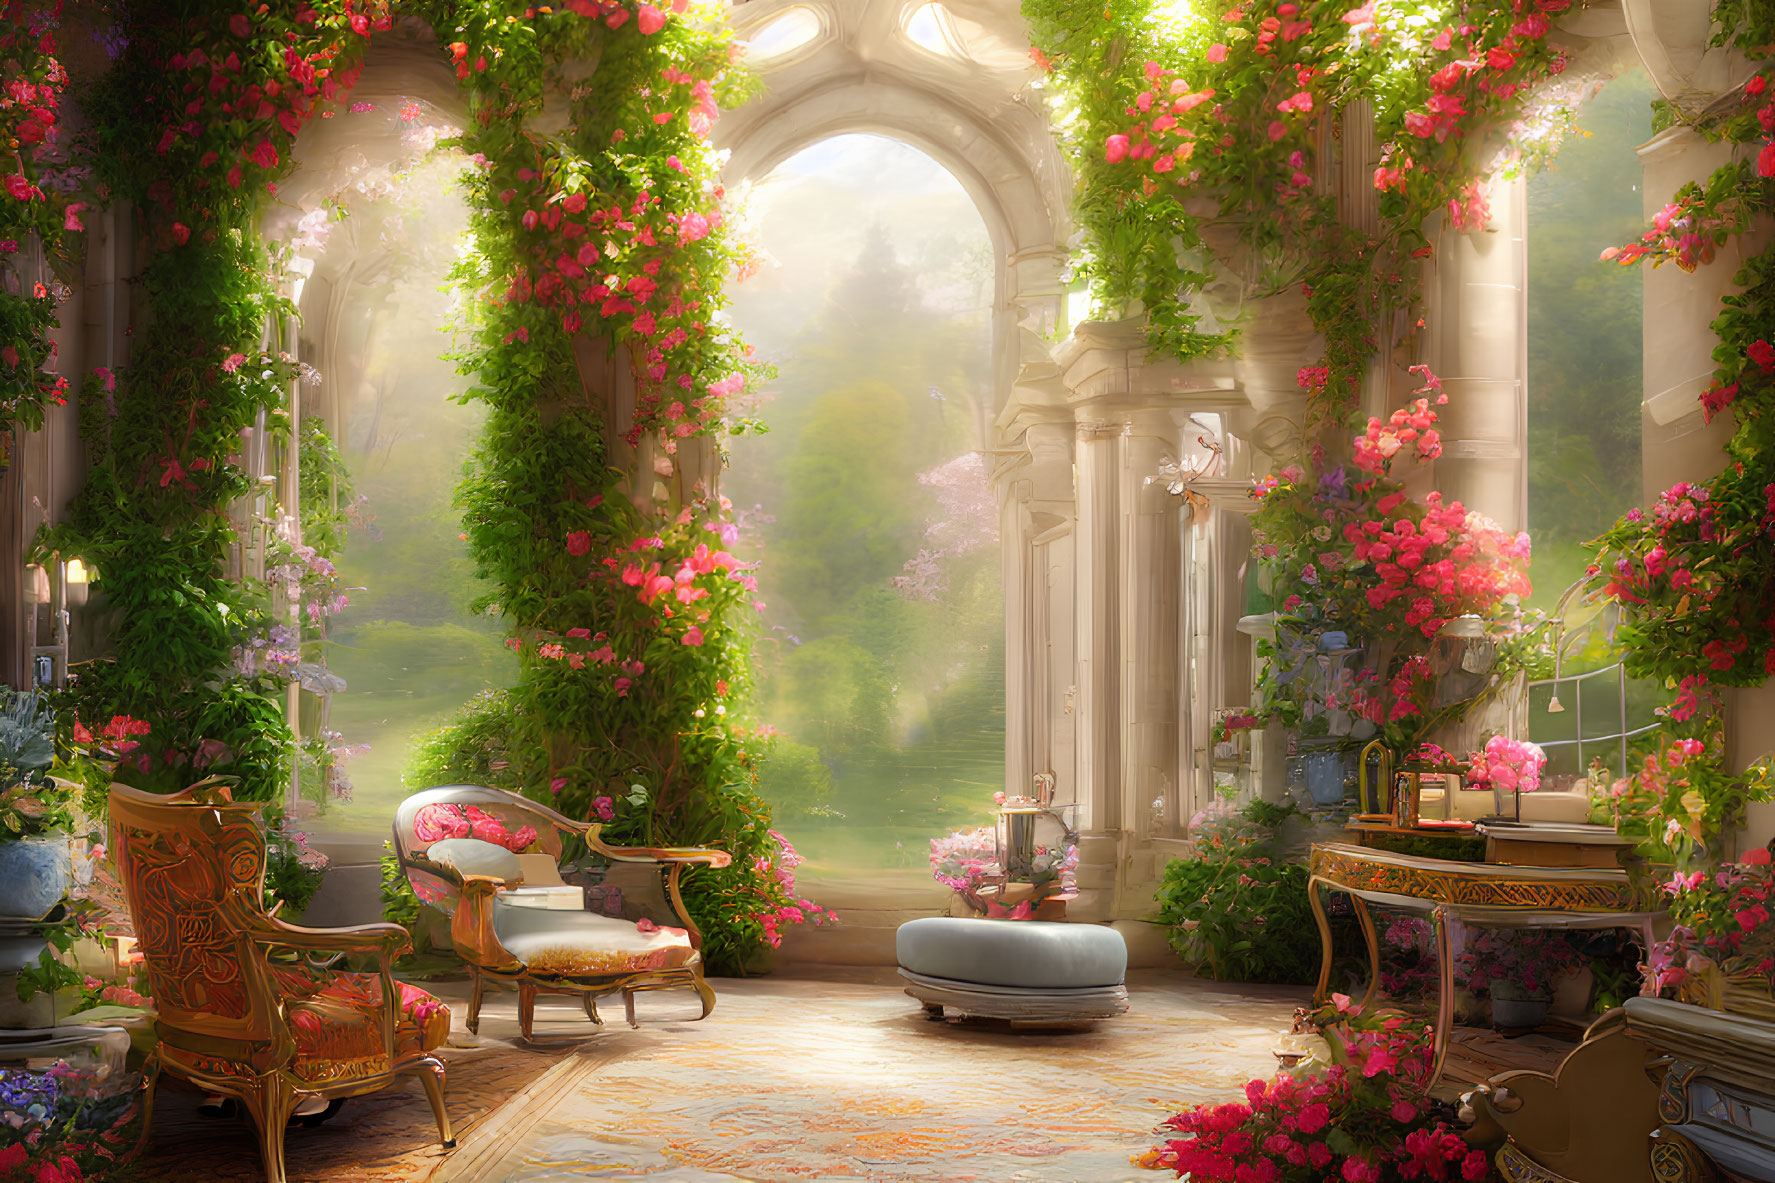 Sunlit room with arch windows and garden view, adorned with flowering vines and antique-style decor.